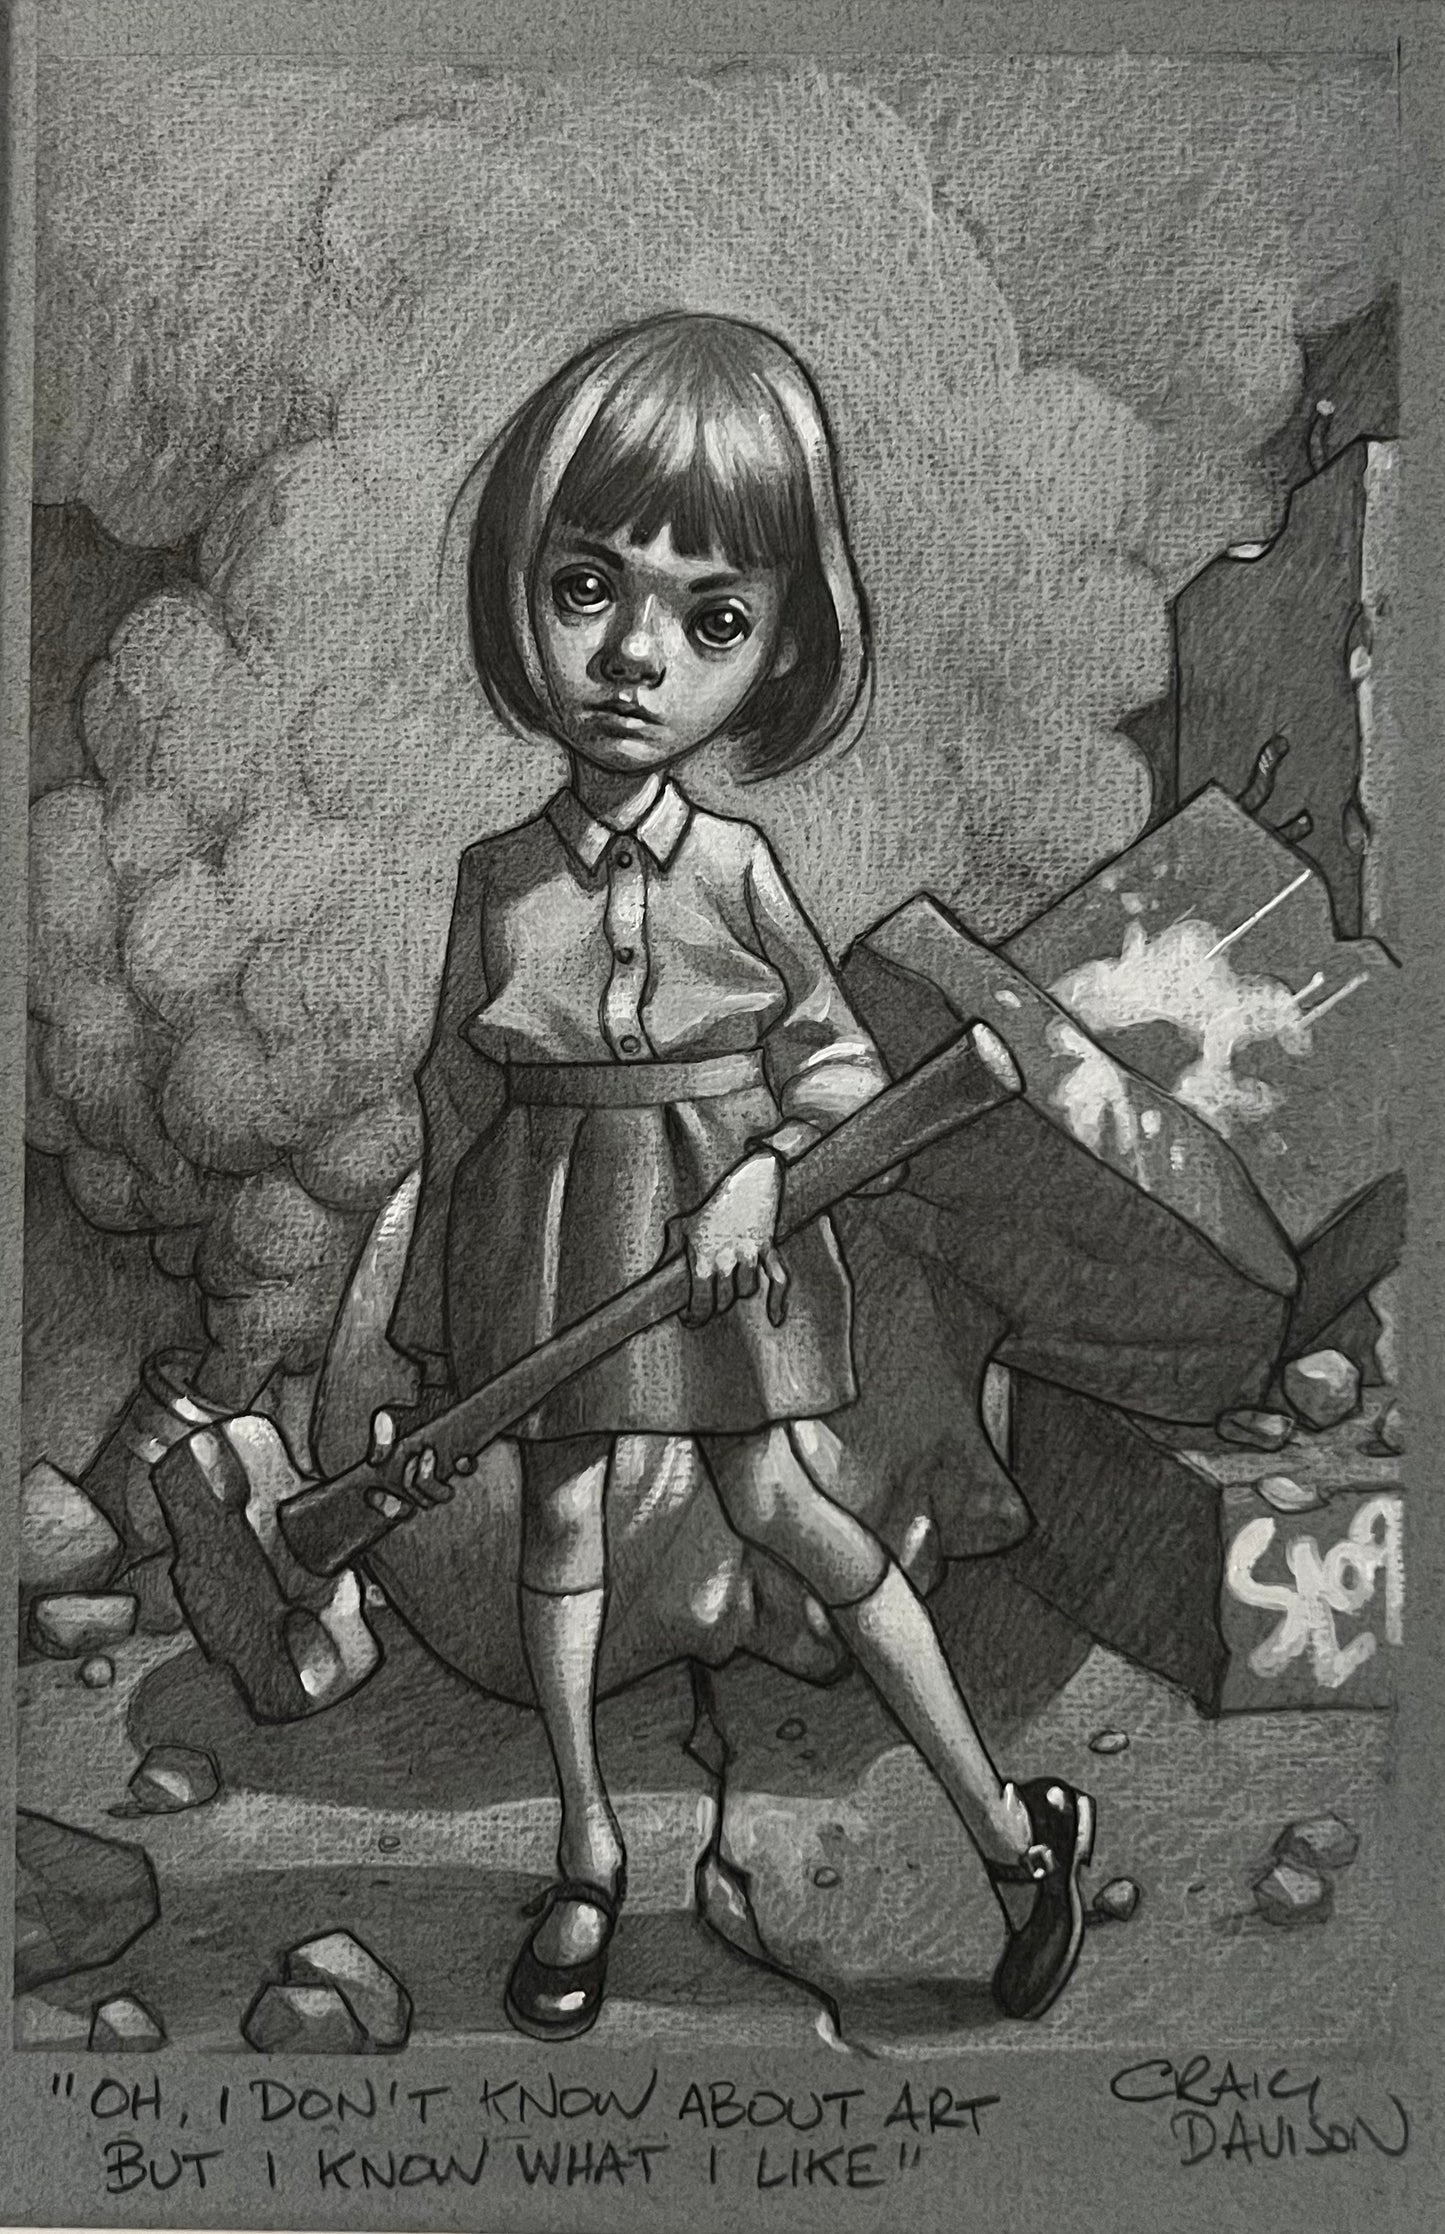 Oh I Don't Know About Art But I Know What I Like Original Pencil Sketch by Craig Davison